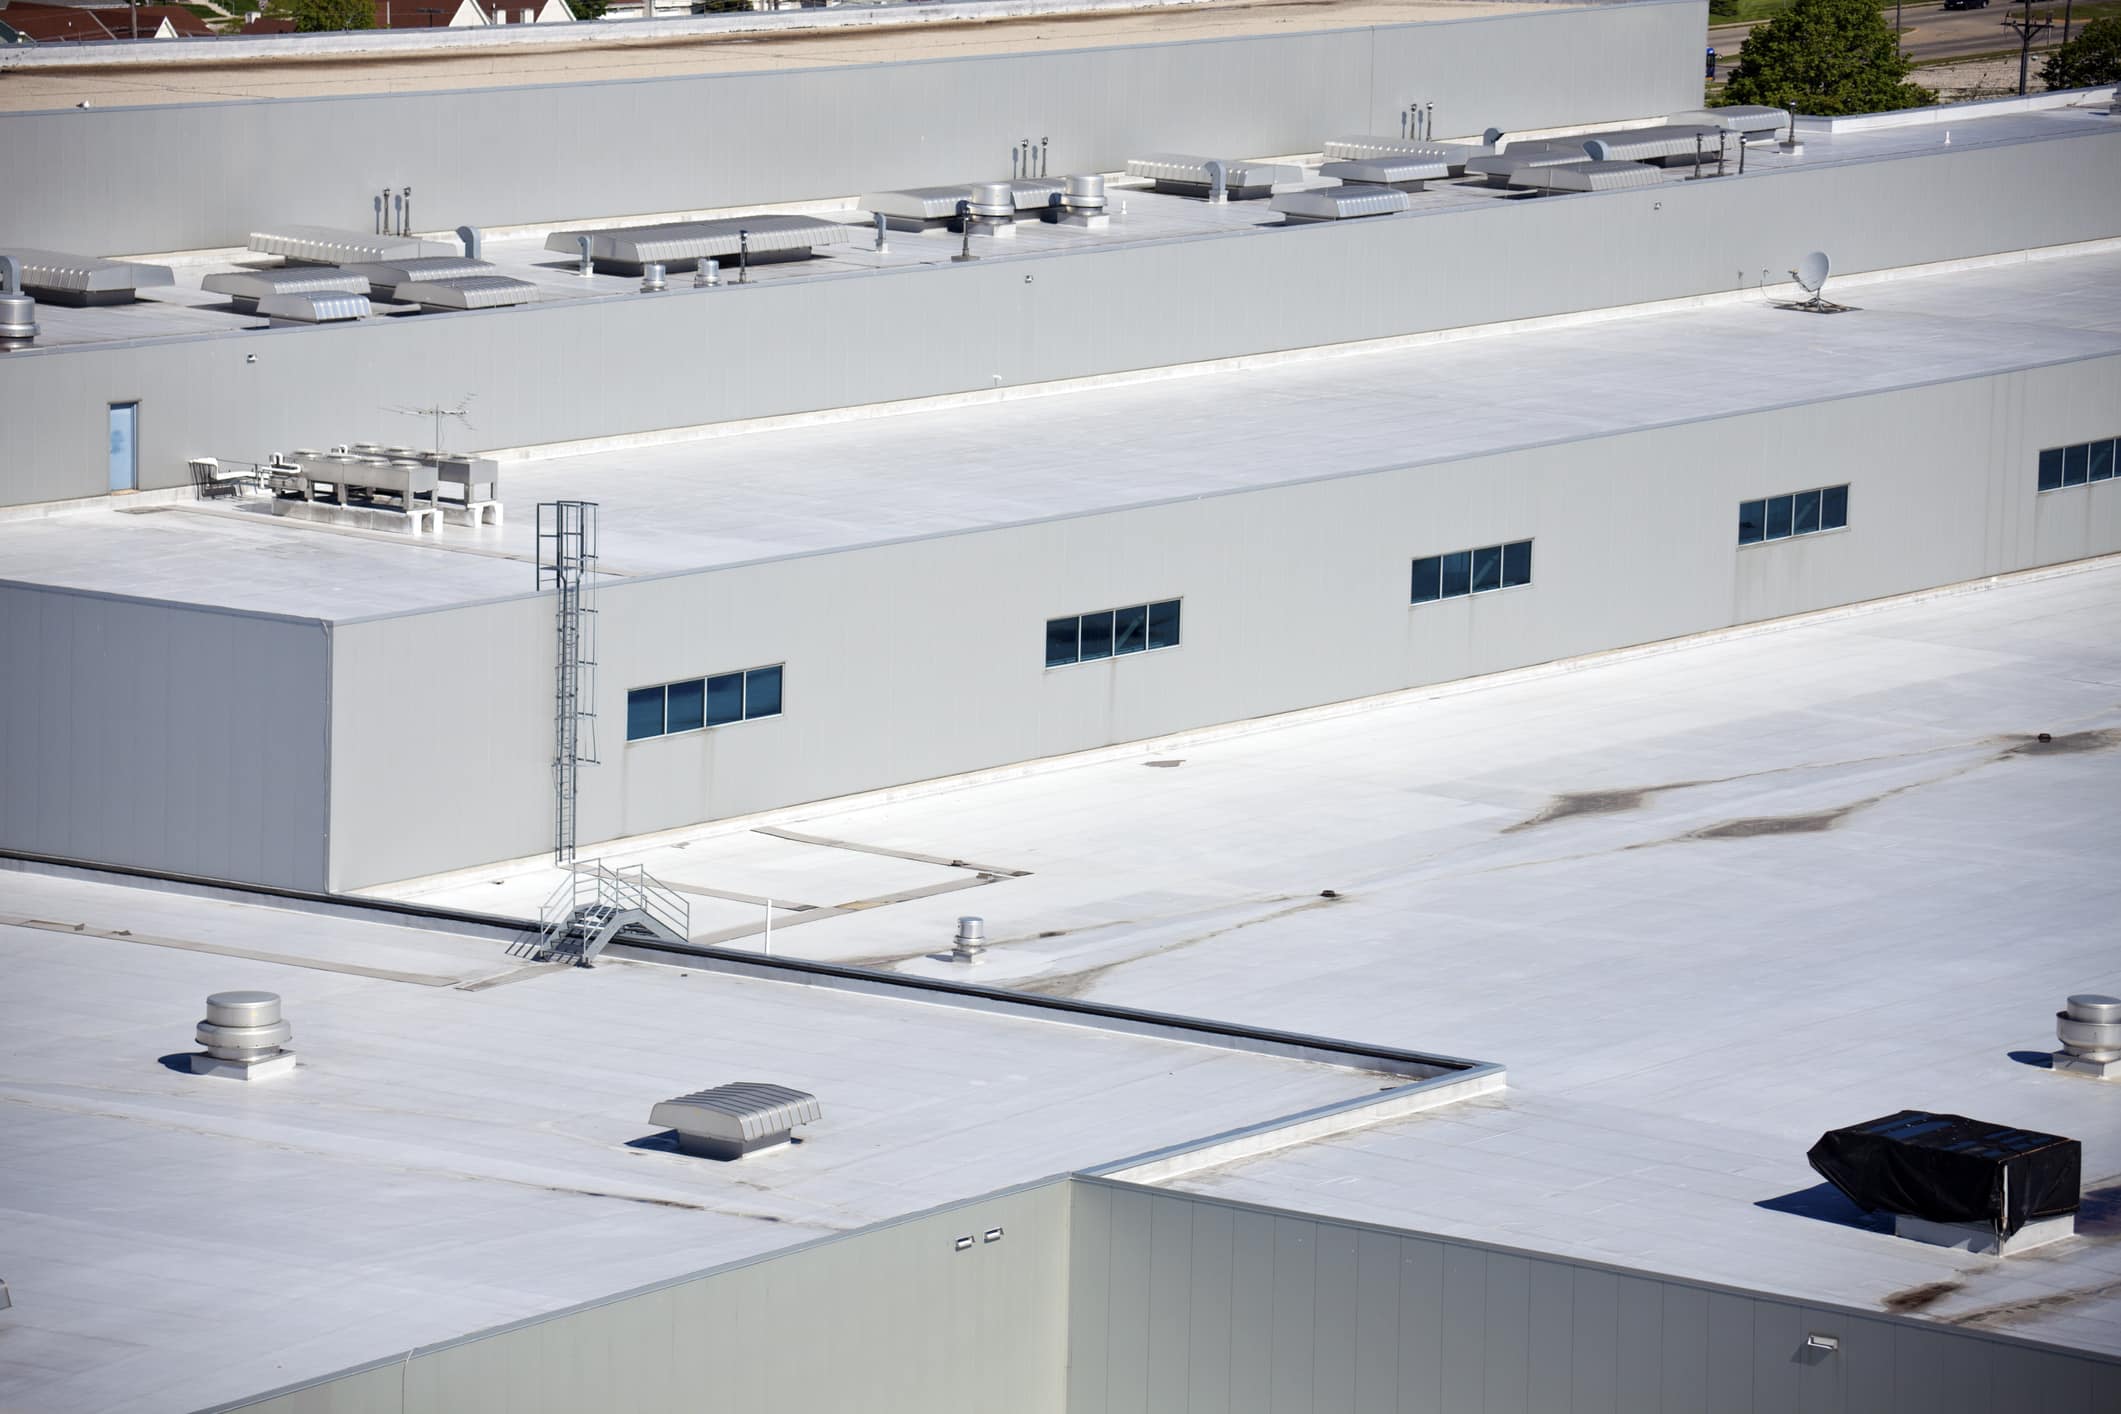 Roofs of the big warehouse - aerial view